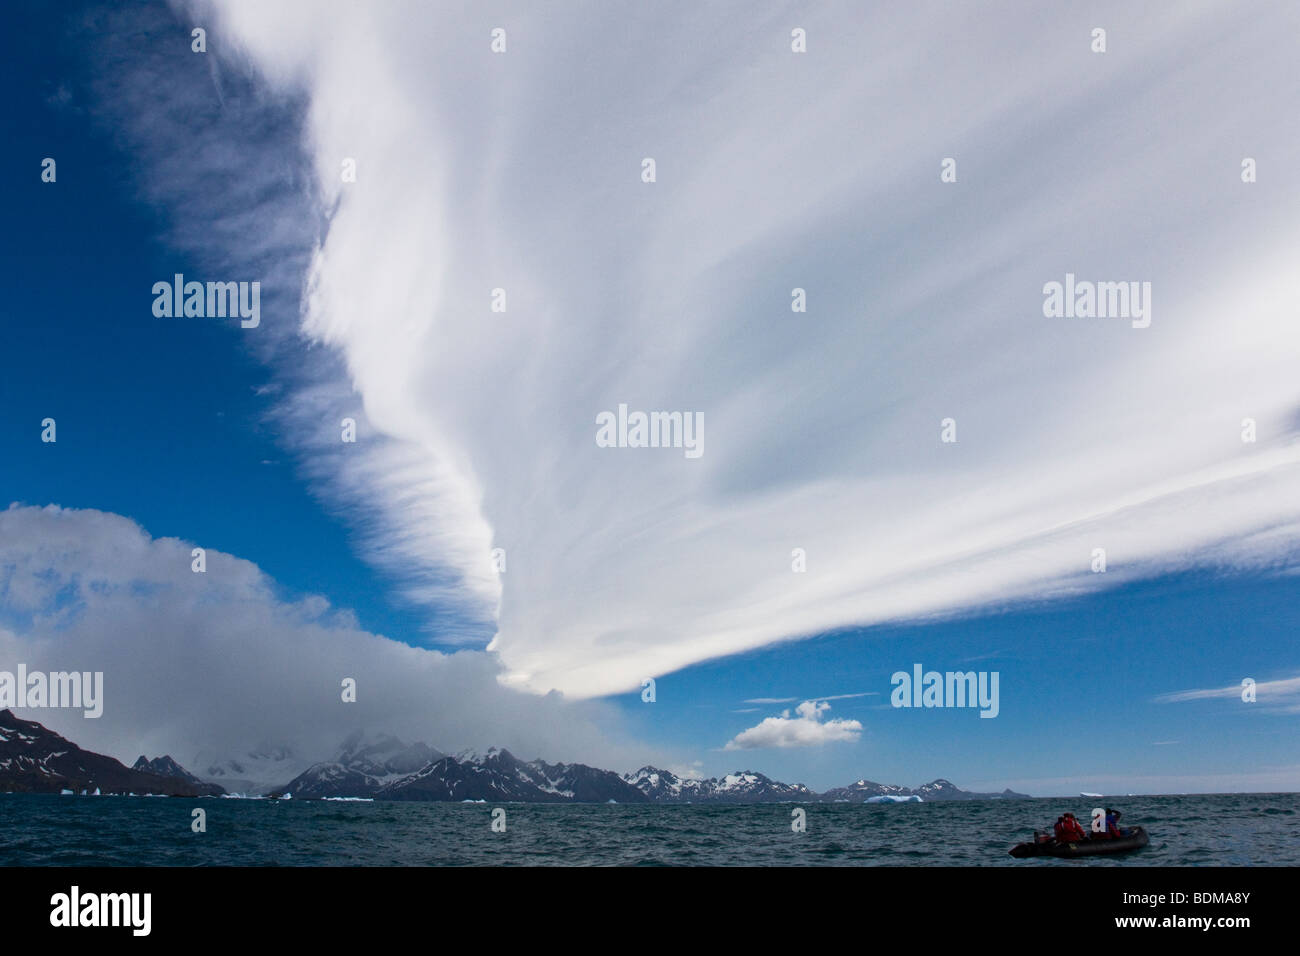 Tall altocumulus lenticular clouds form above tall mountain in Antarctic summer, South Georgia Antarctica small zodiac boat with people in foreground Stock Photo